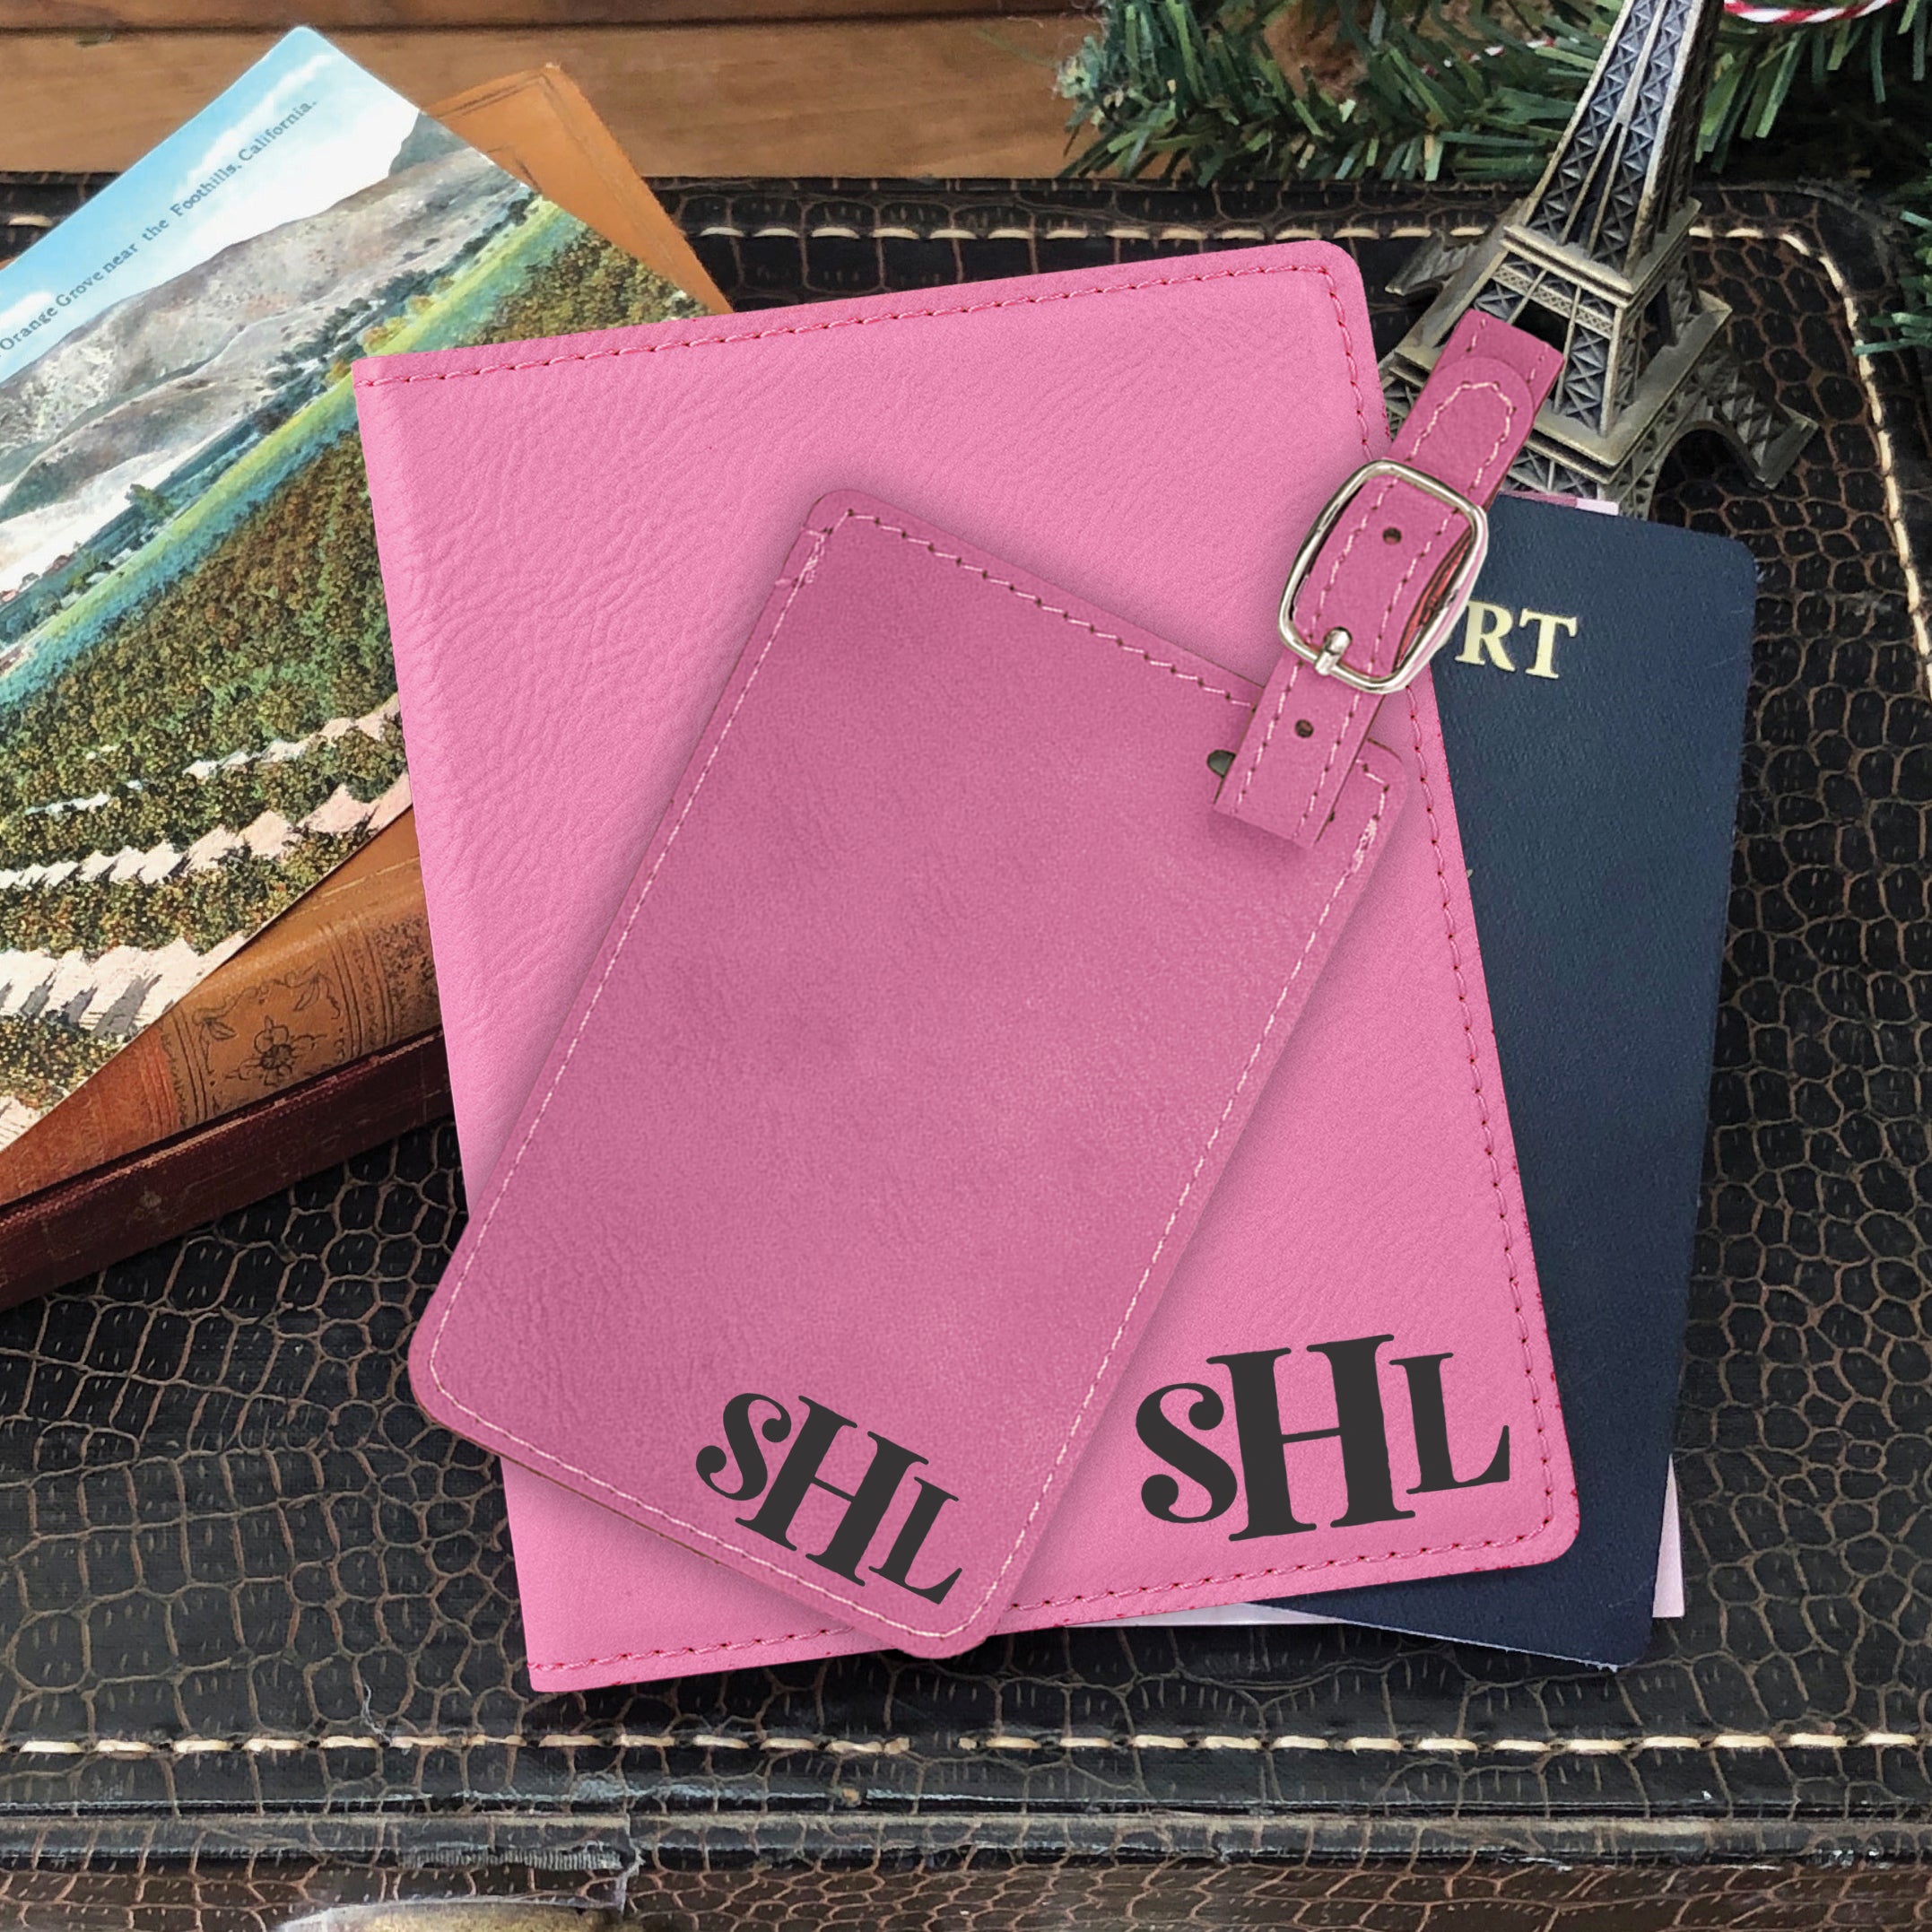 Personalized leather passport cover, passport holder and luggage tag set,  passport wallet, groomsmen gift, monogram passport case, gifts for  travelers